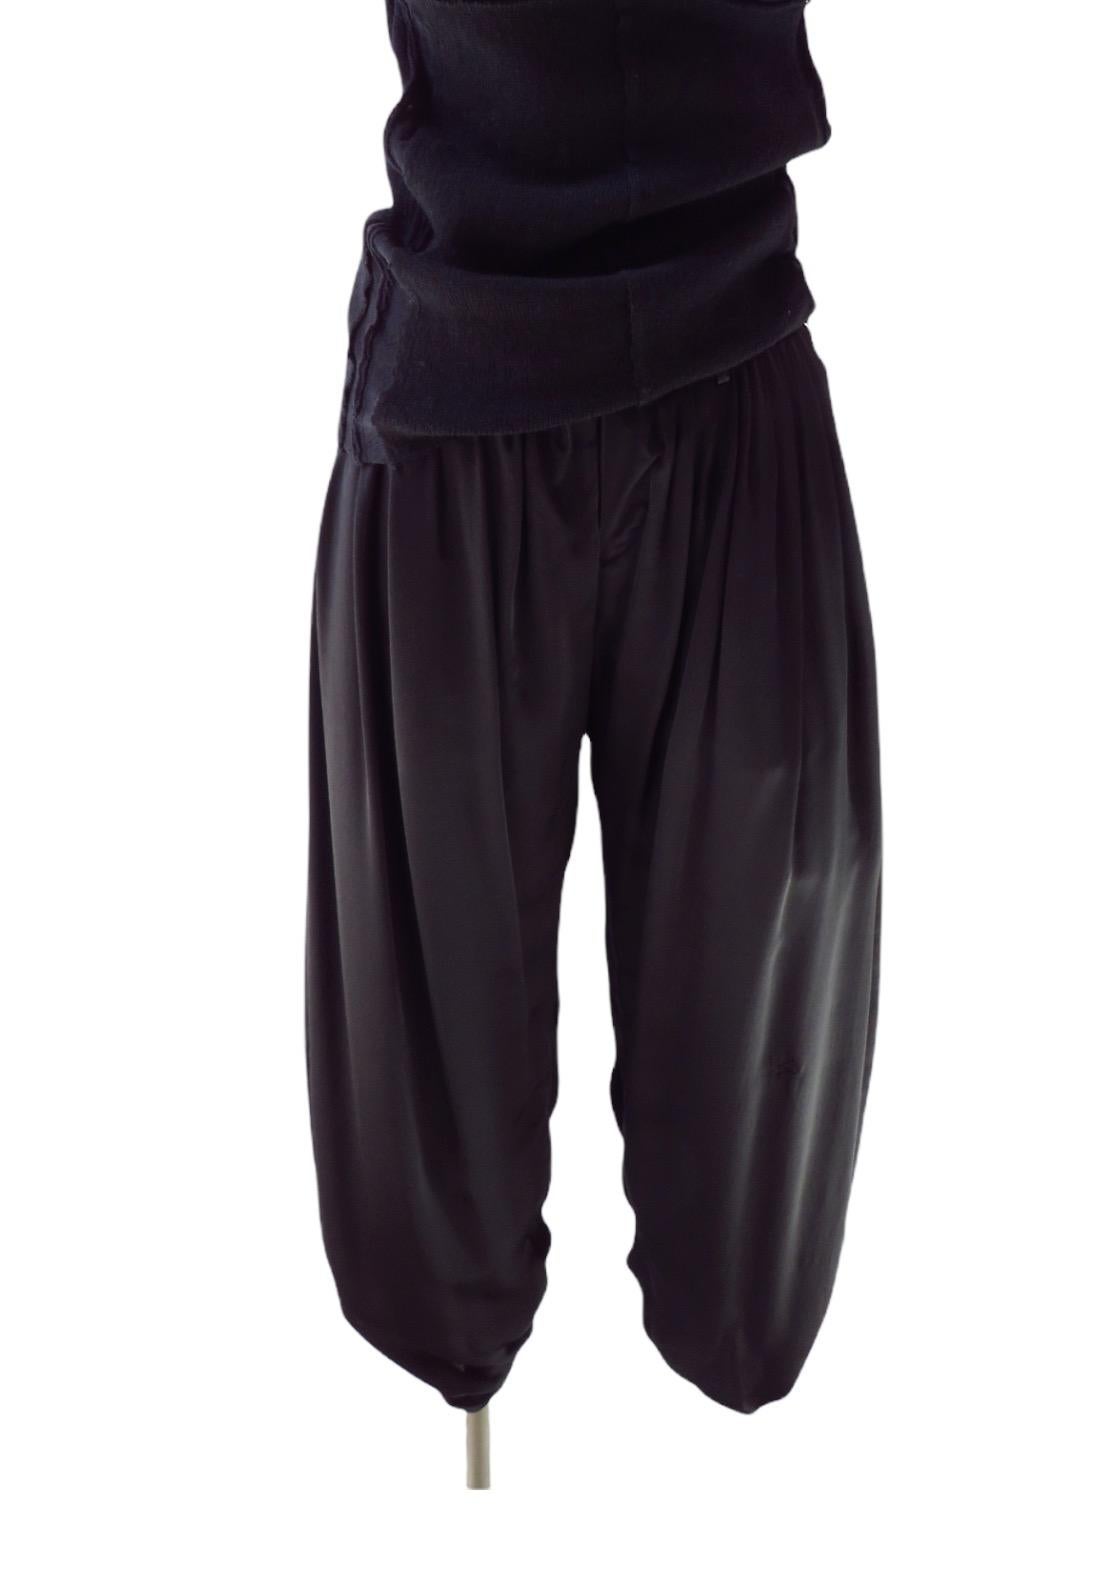 Undercover Black Pleated Silk Harem Pants For Sale 7